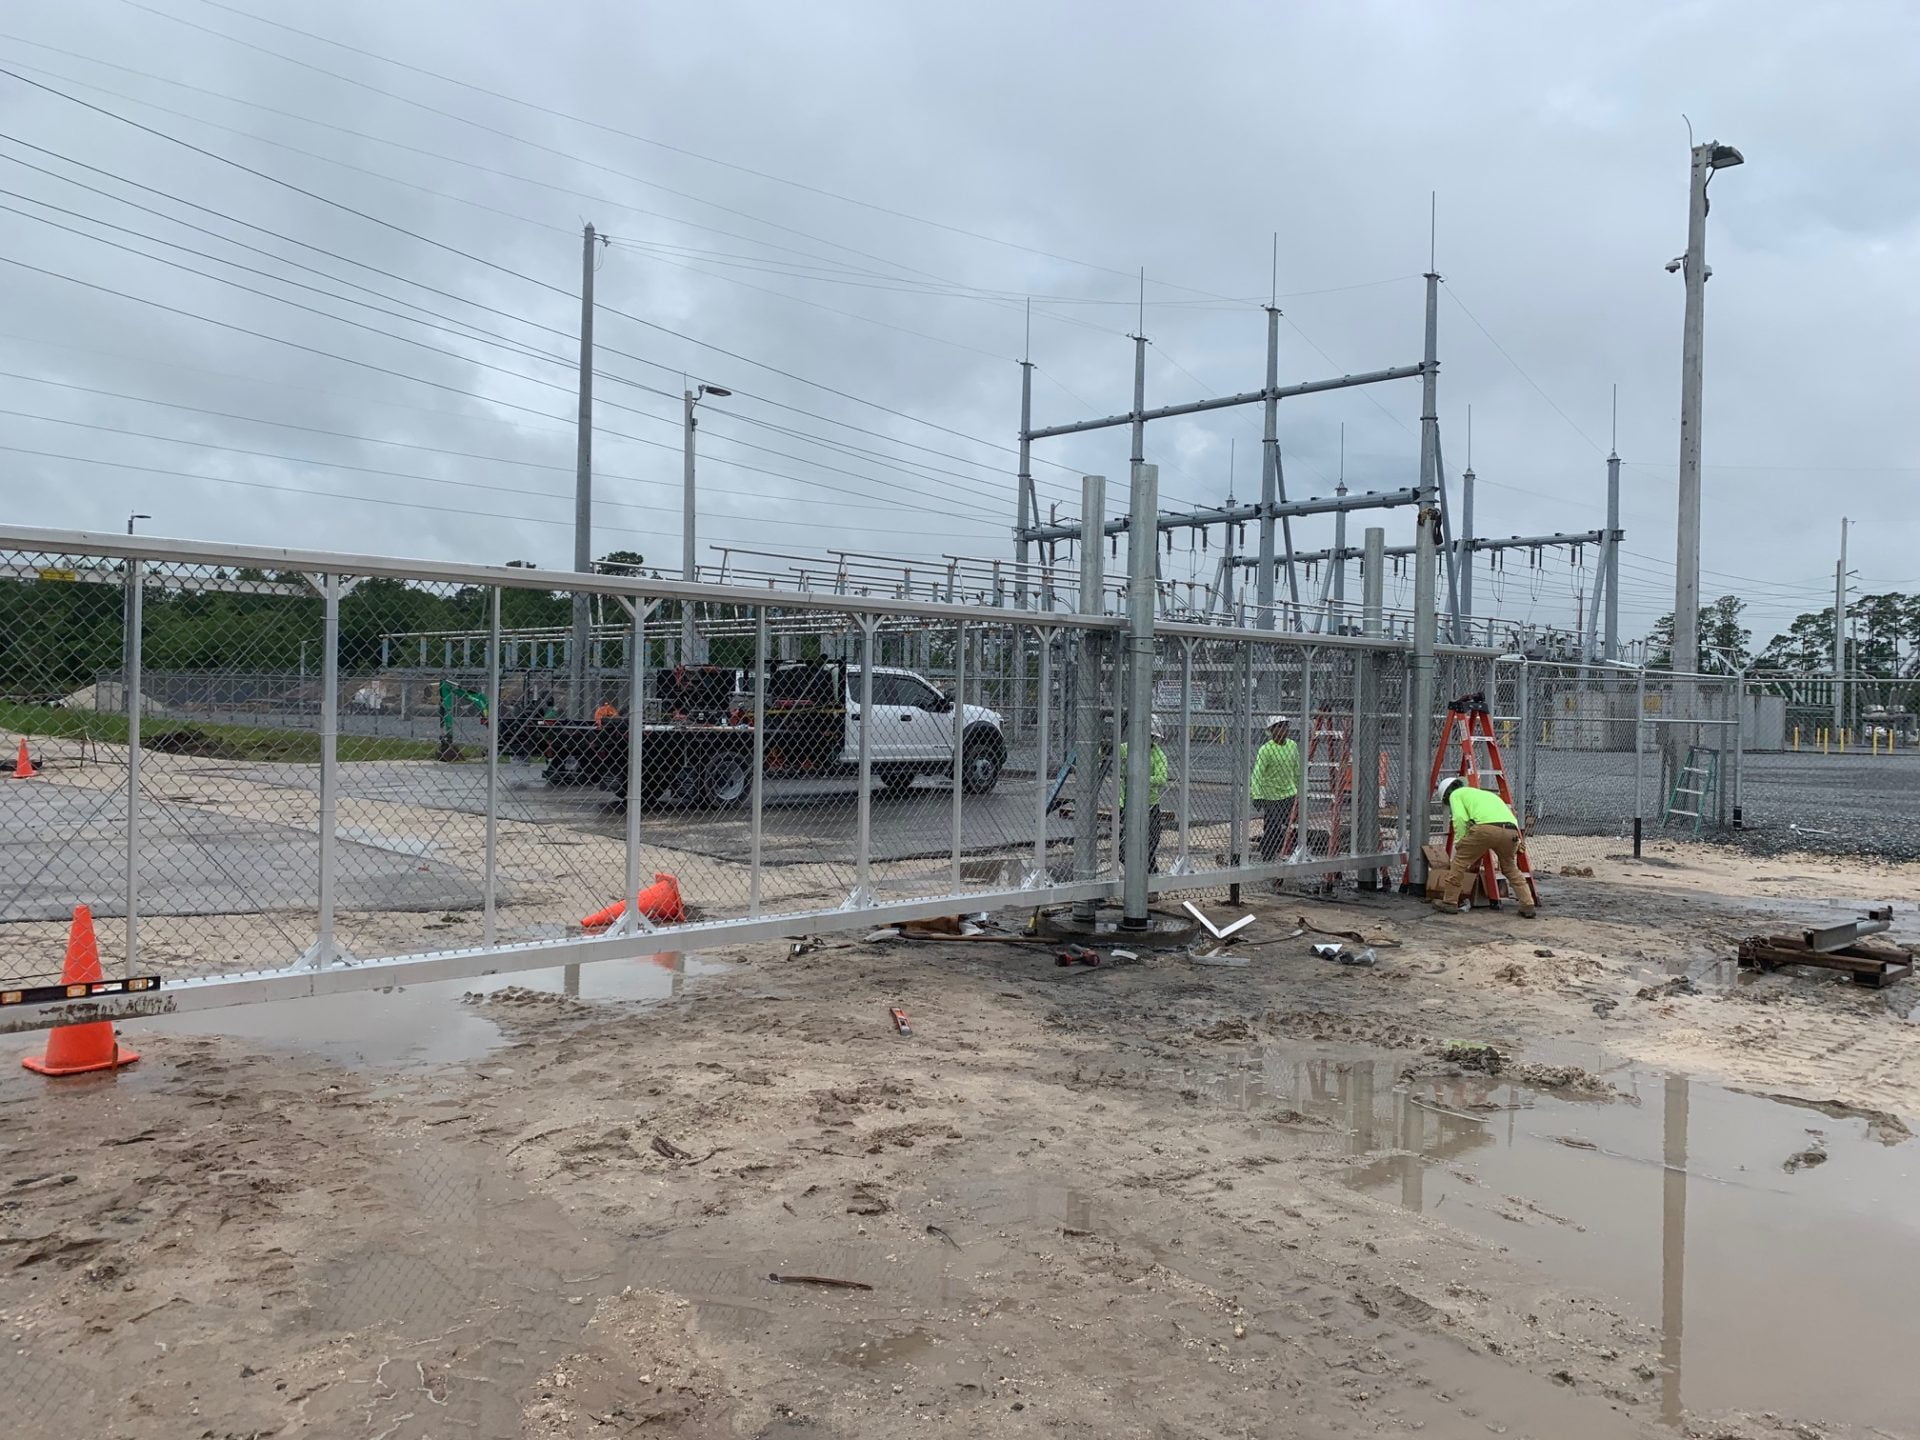 You are currently viewing FP&L Raven Substation